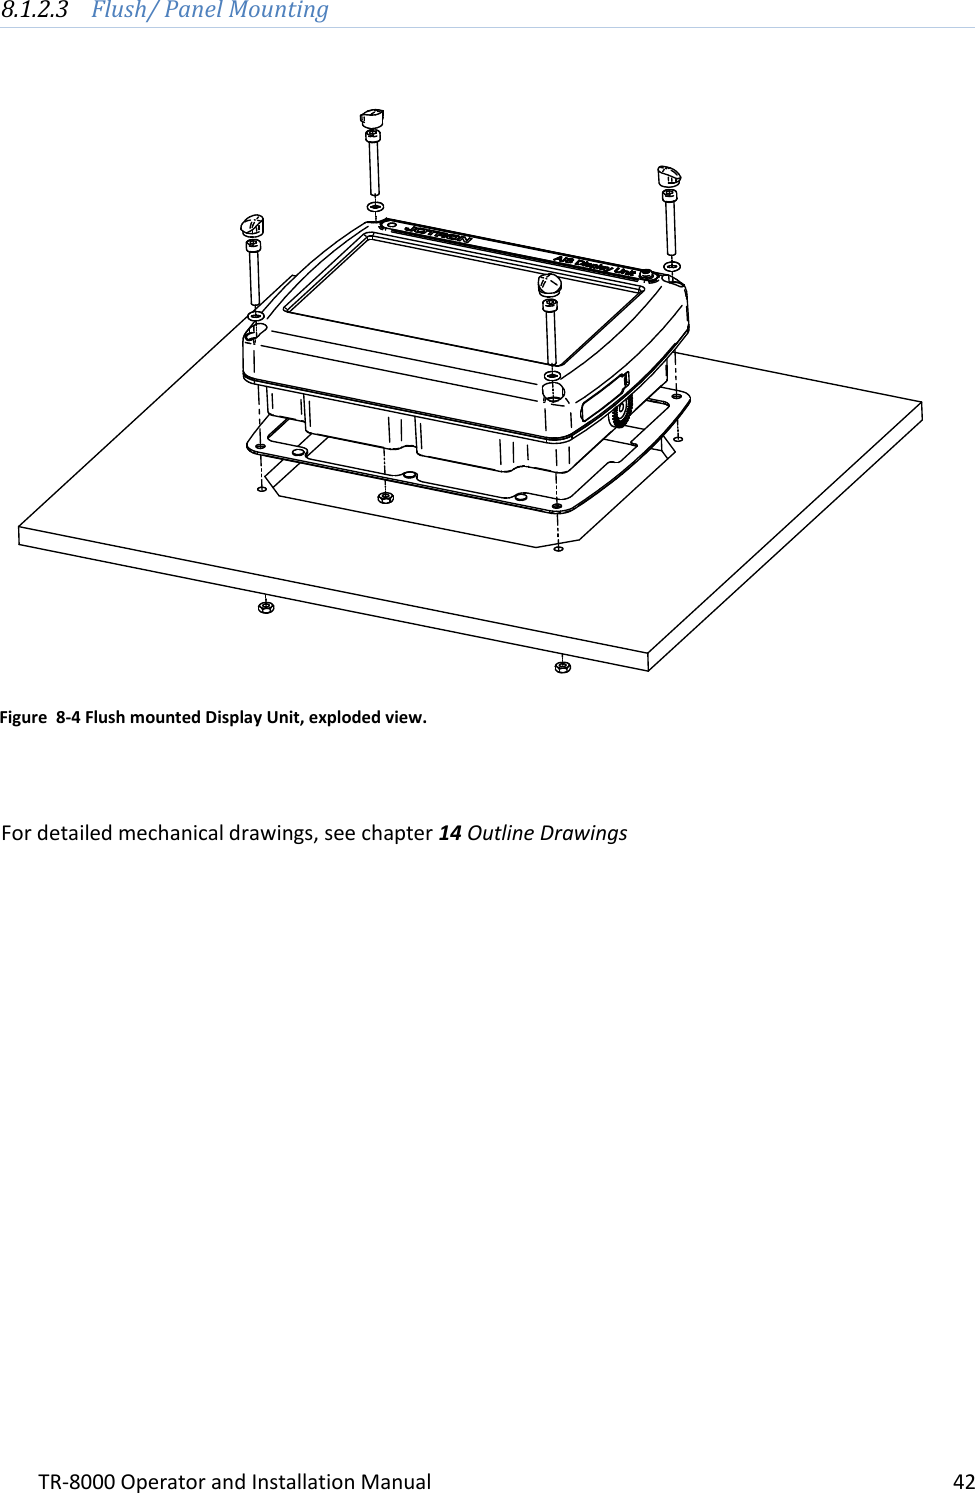 TR-8000 Operator and Installation Manual    42  8.1.2.3 Flush/ Panel Mounting                              For detailed mechanical drawings, see chapter 14 Outline Drawings    Figure  8-4 Flush mounted Display Unit, exploded view. 